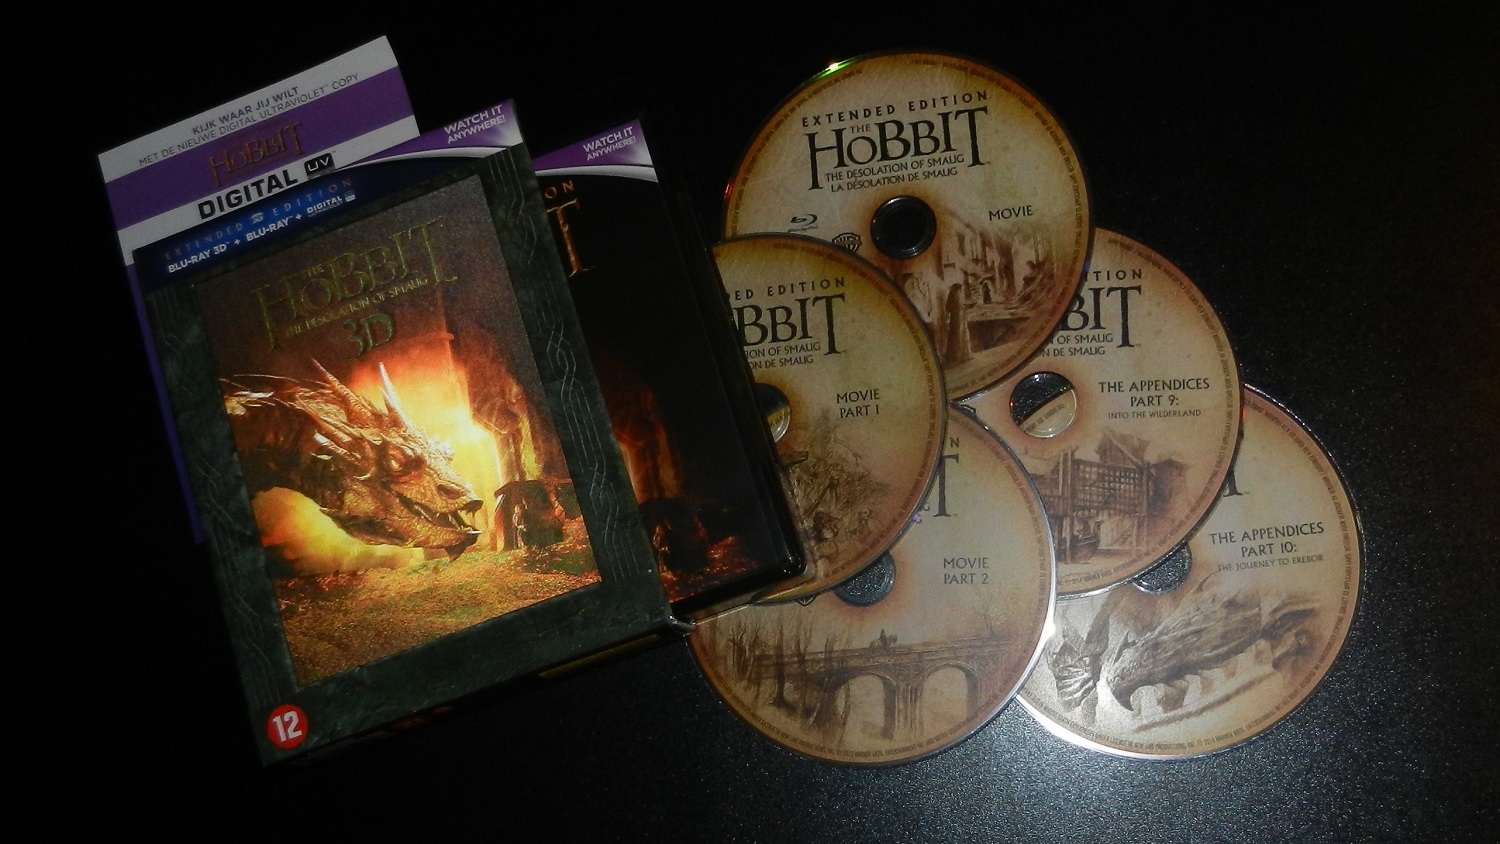 Blu-Ray Review: The Hobbit: The Desolation of Smaug (Extended Edition)